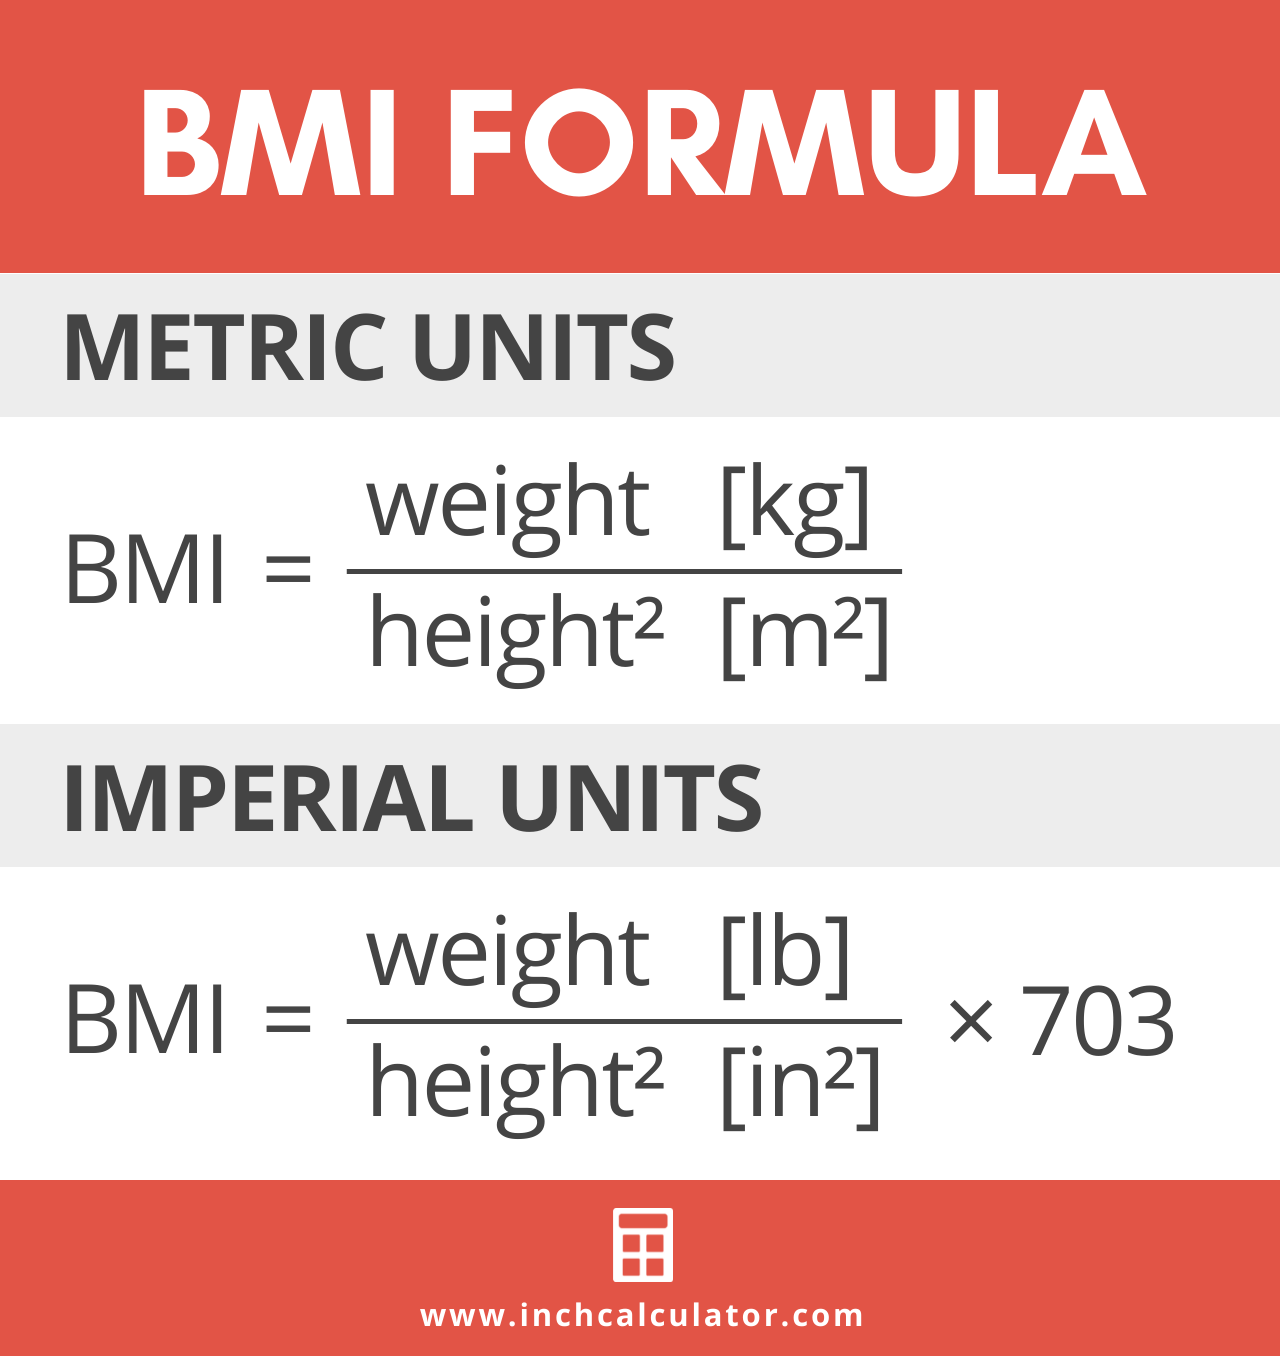 graphic showing the BMI formula, where BMI is equal to weight divided by height squared